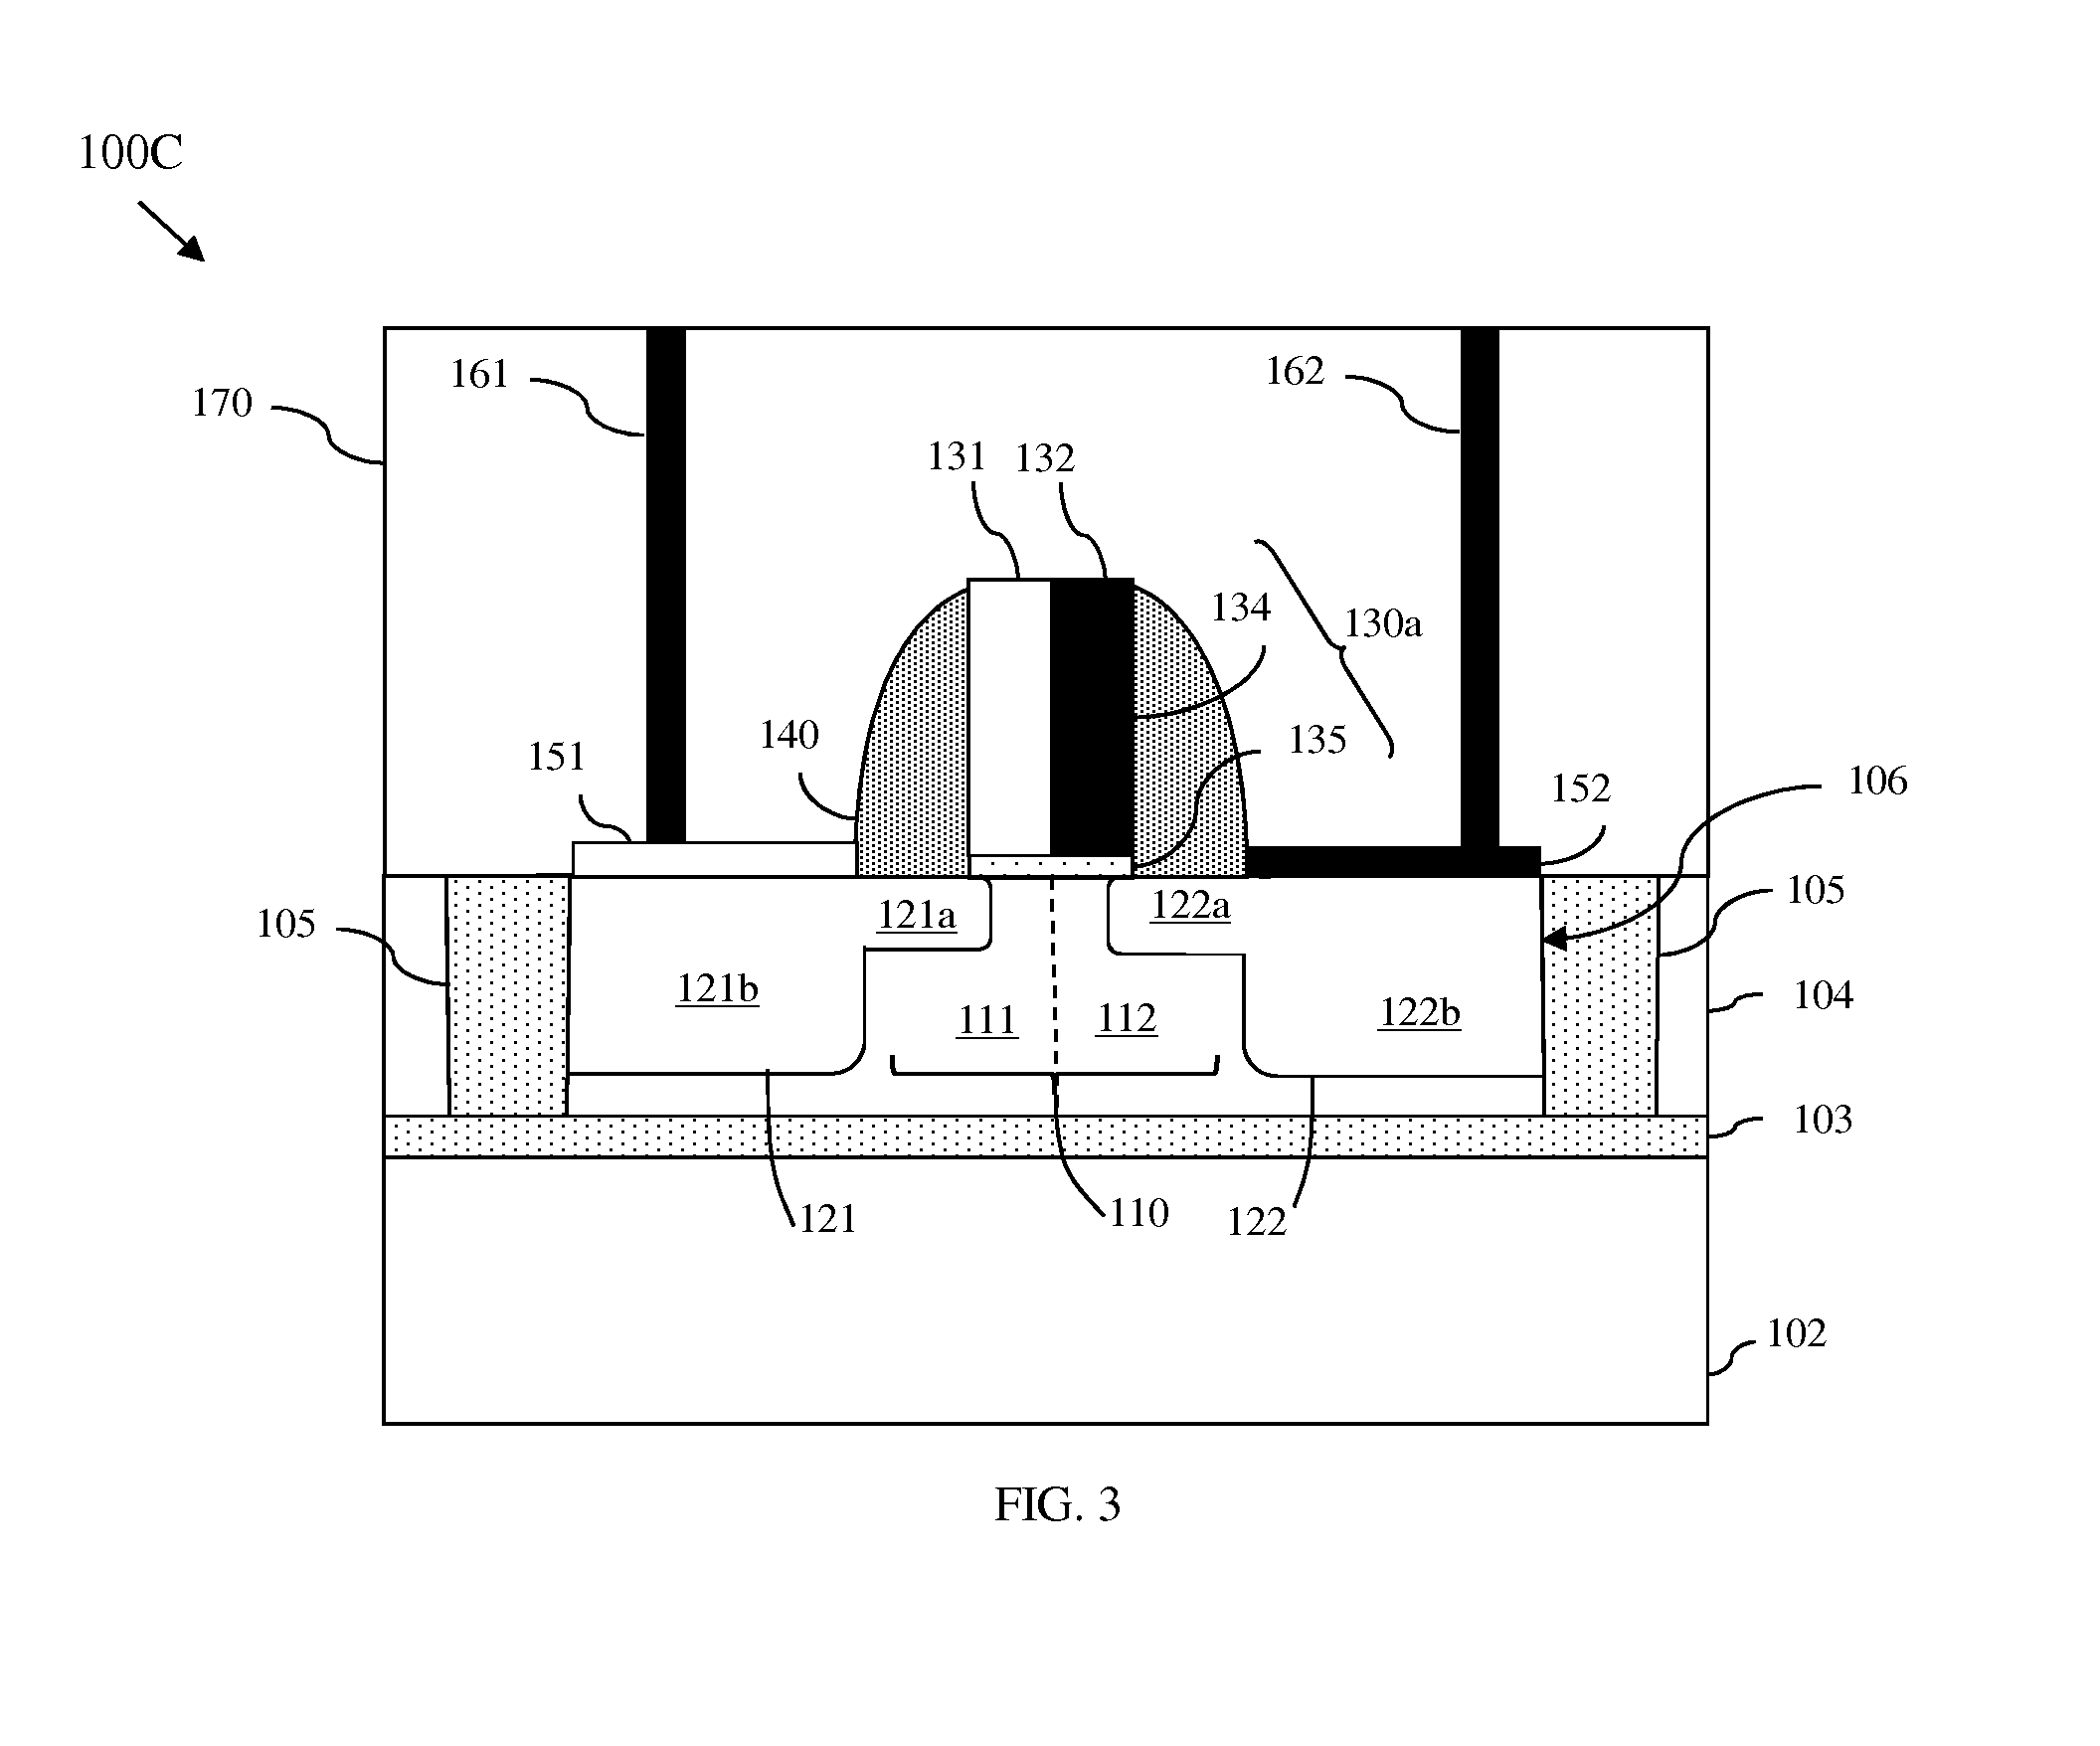 Field effect transistor having phase transition material incorporated into one or more components for reduced leakage current